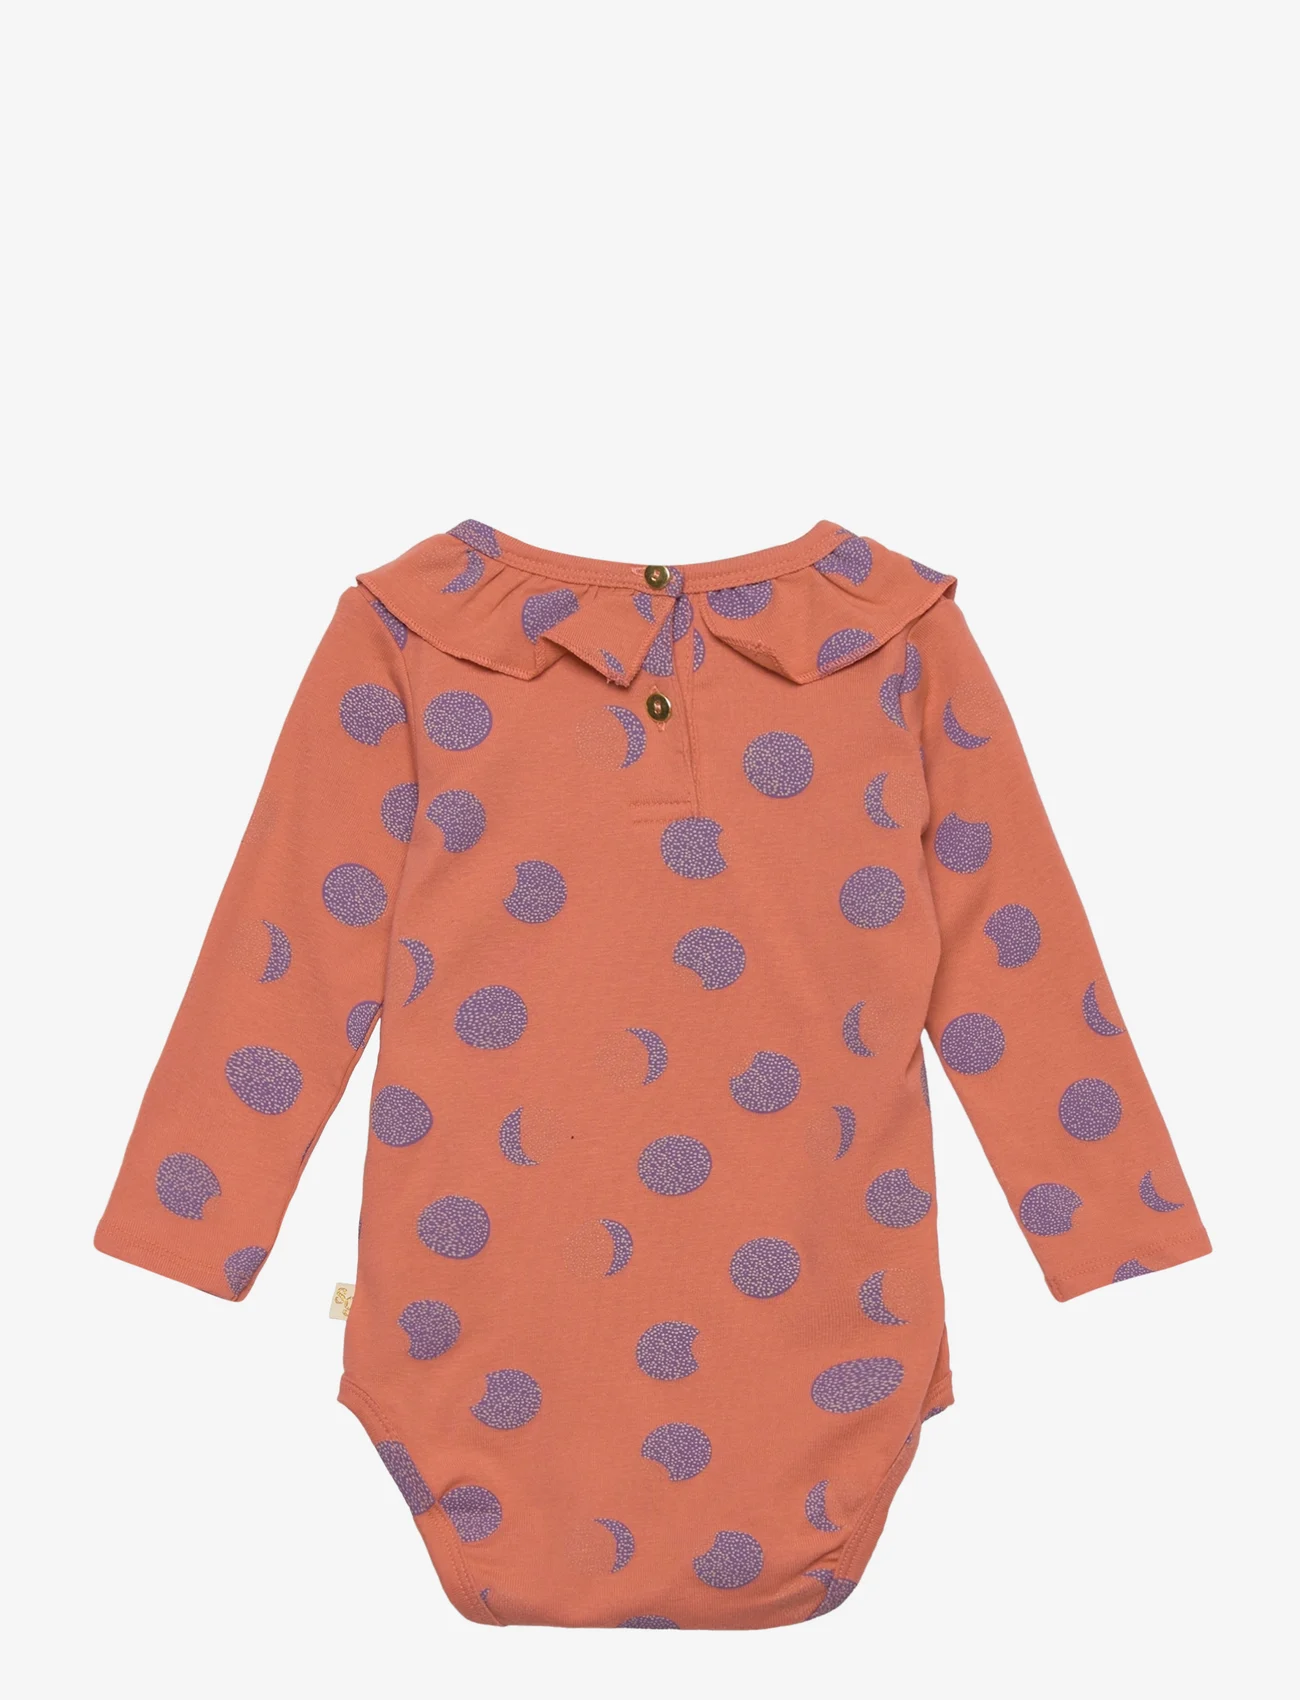 Soft Gallery - SGBize Dotty Moon LS body - lowest prices - crabapple - 1